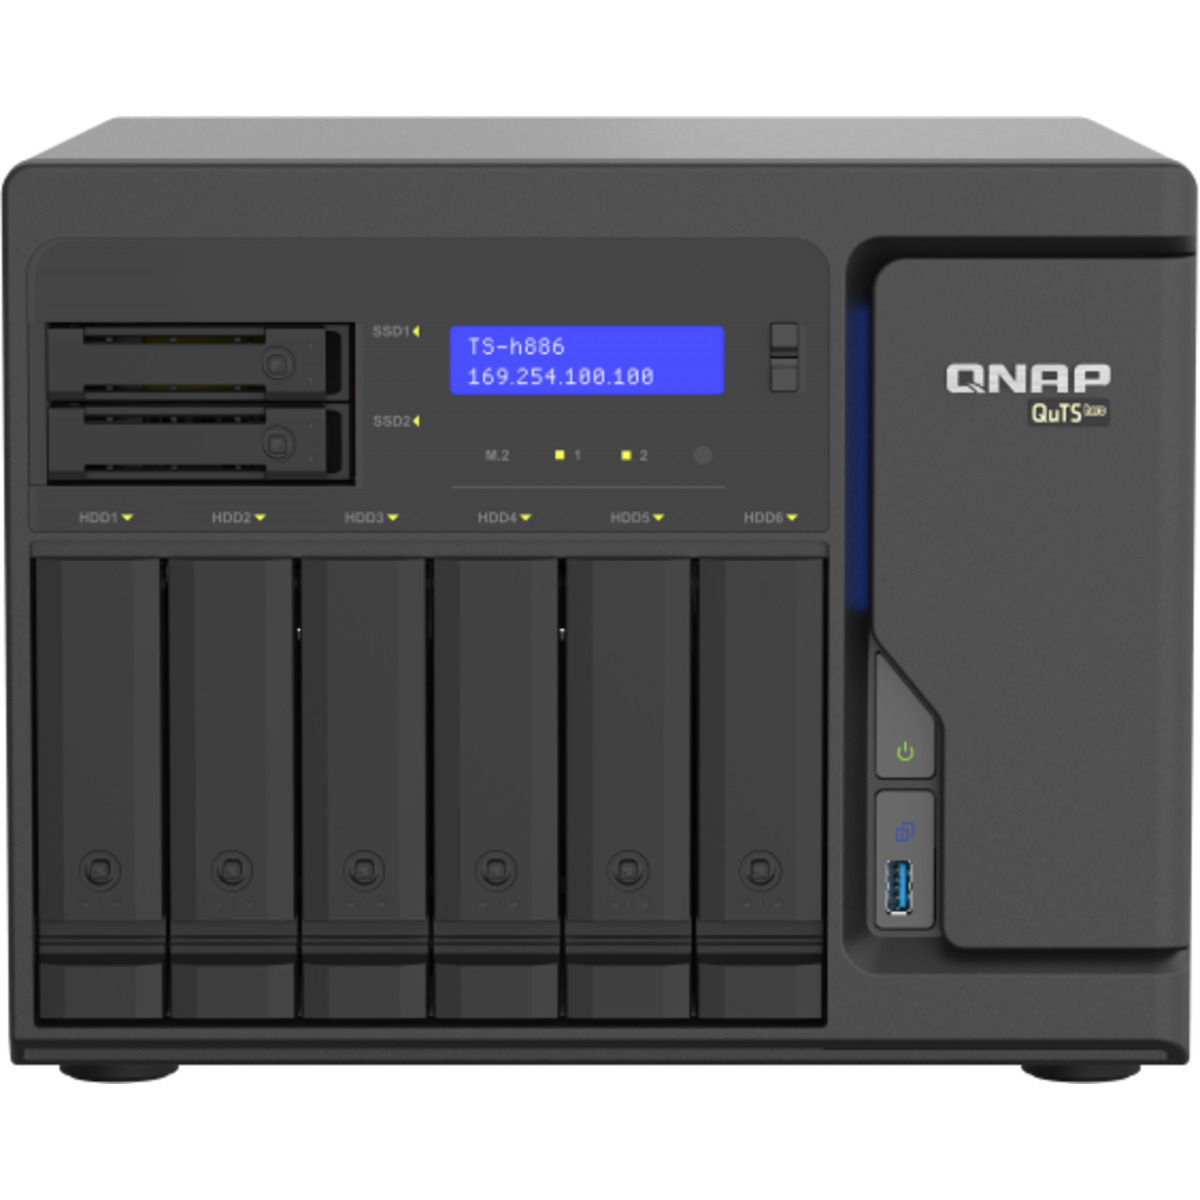 buy $3680 QNAP TS-h886 QuTS hero NAS 12tb Desktop NAS - Network Attached Storage Device 6x2000gb Western Digital Red SA500 WDS200T1R0A 2.5 SATA 6Gb/s SSD NAS Class Drives Installed - Burn-In Tested - nas headquarters buy network attached storage server device das new raid-5 free shipping usa TS-h886 QuTS hero NAS